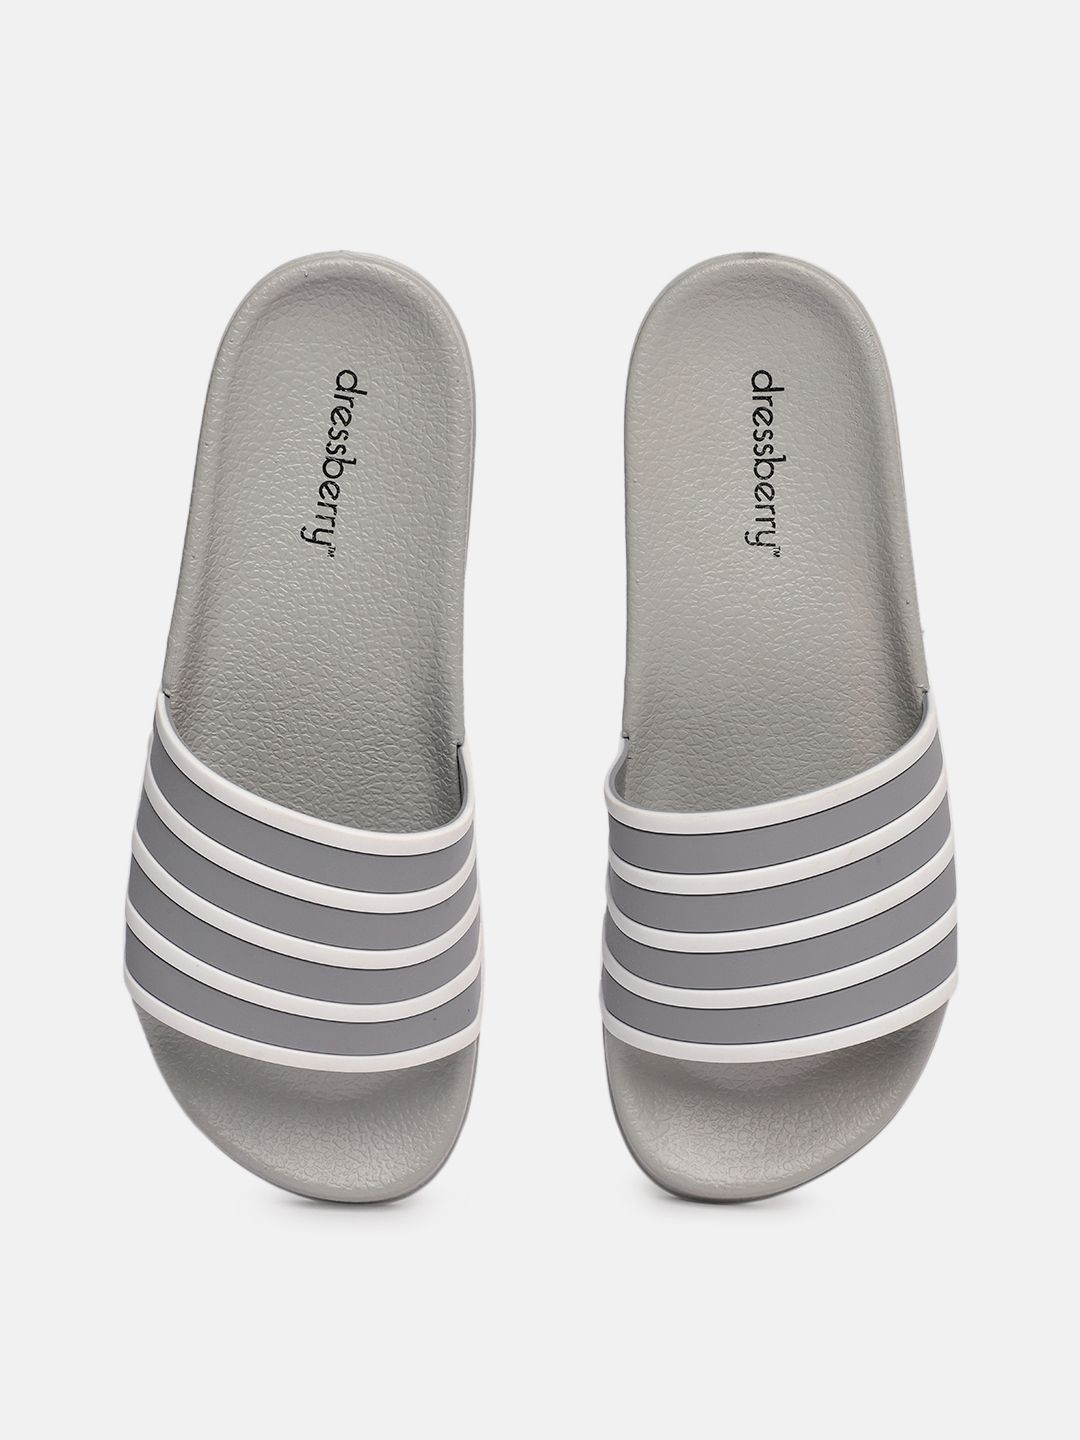 DressBerry Women Grey & White Striped Sliders Price in India